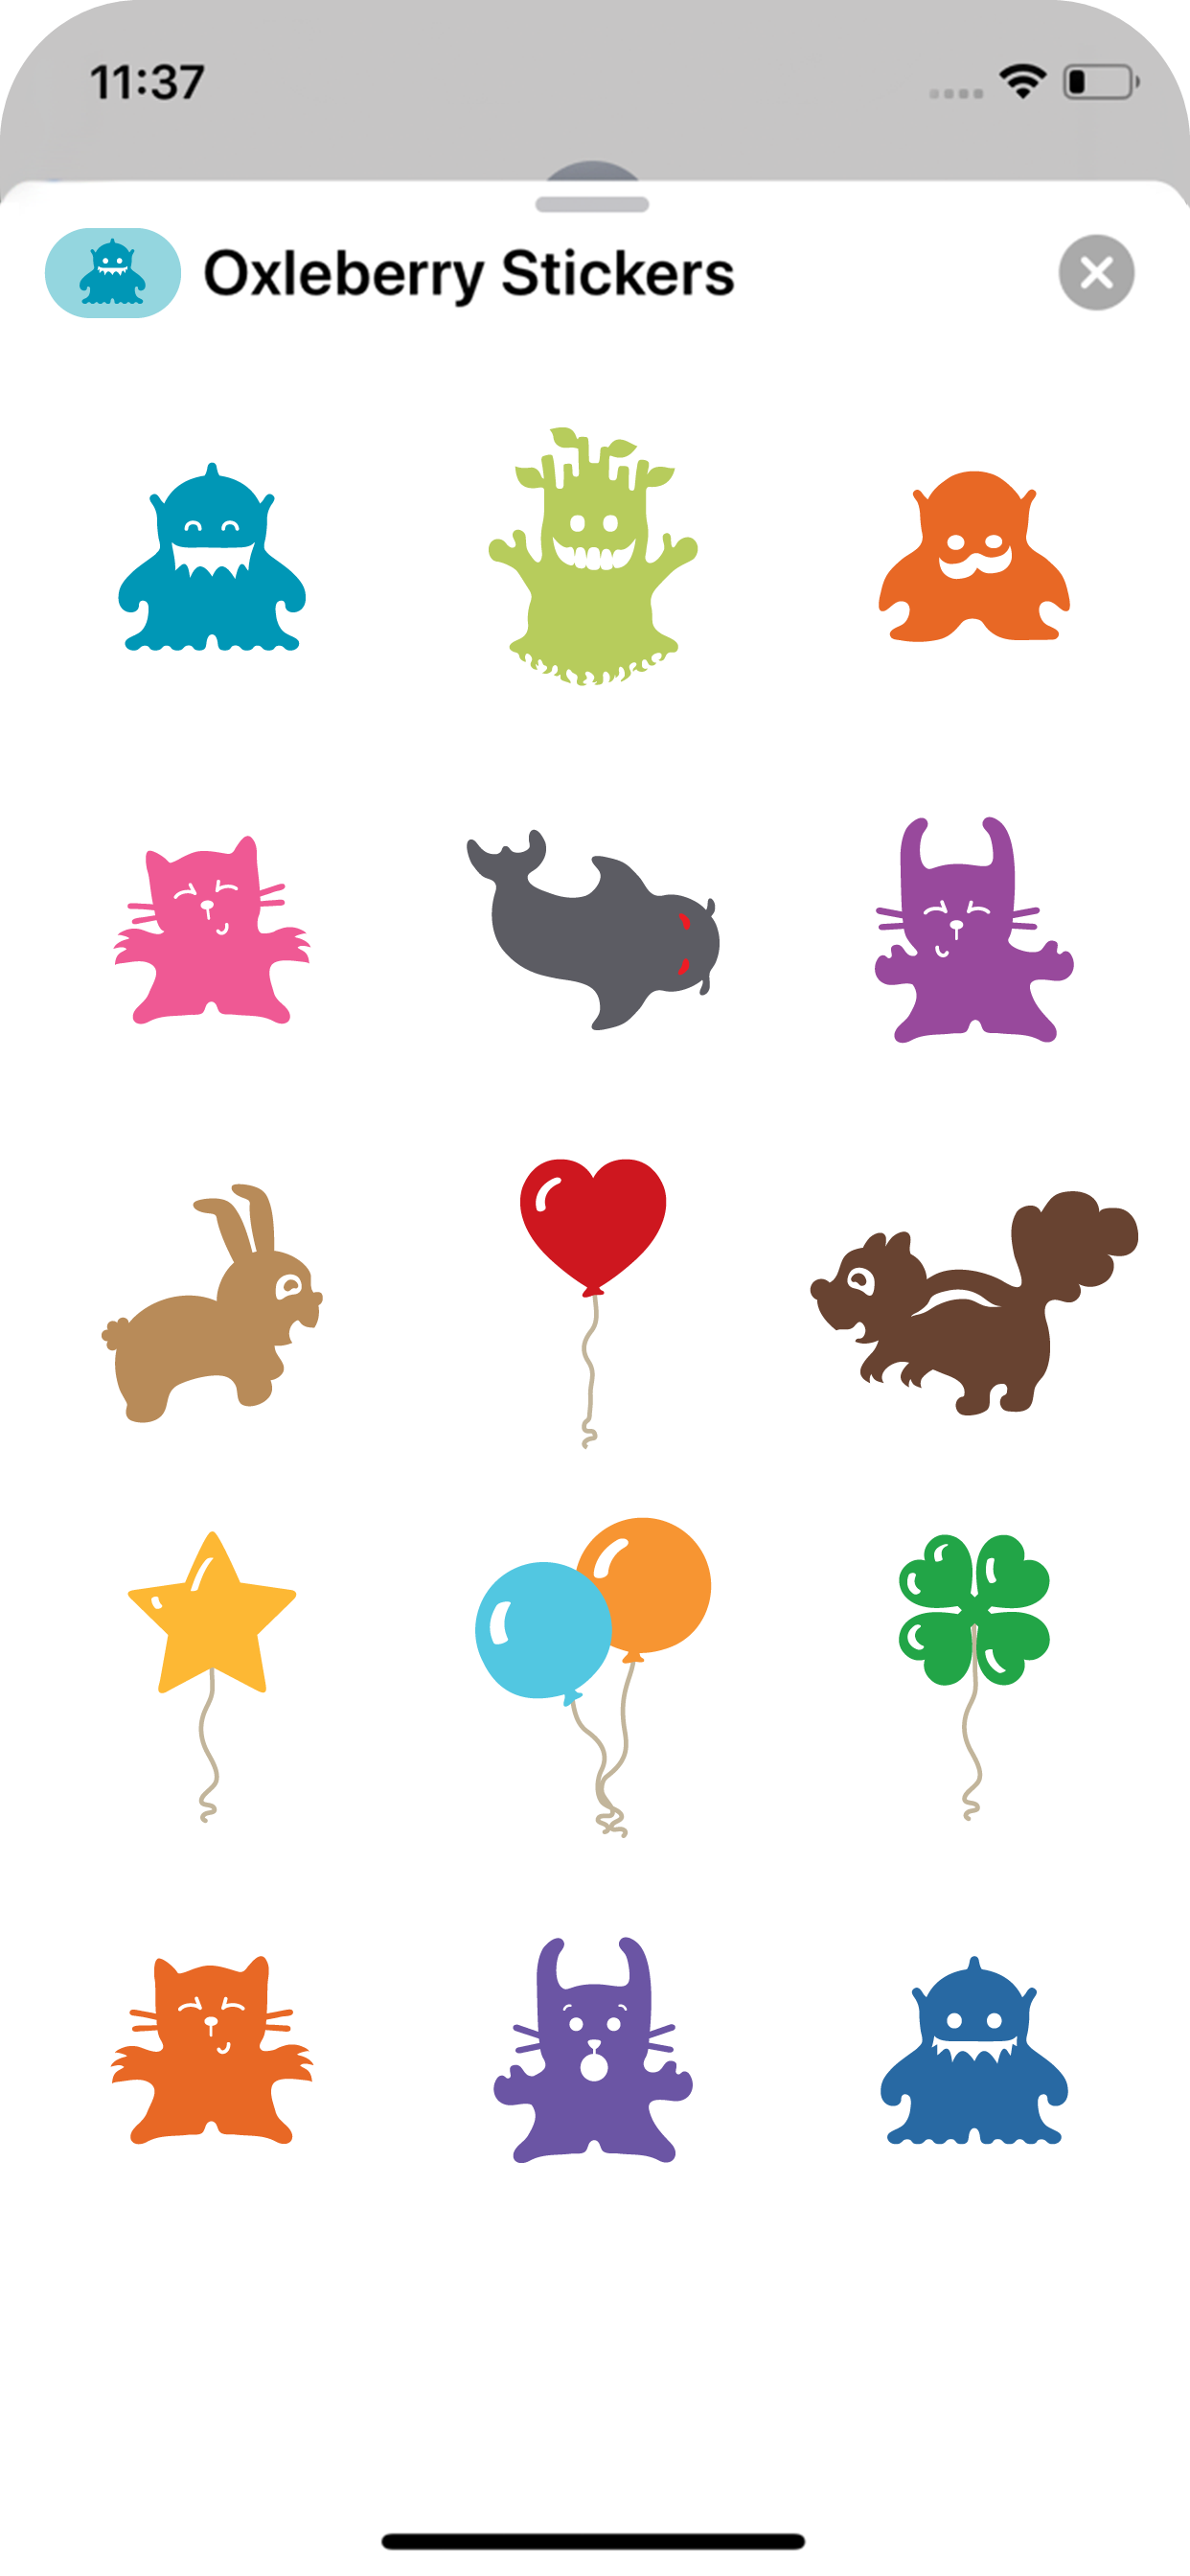 Gallery of 15 stickers of cute monsters, balloons and animals